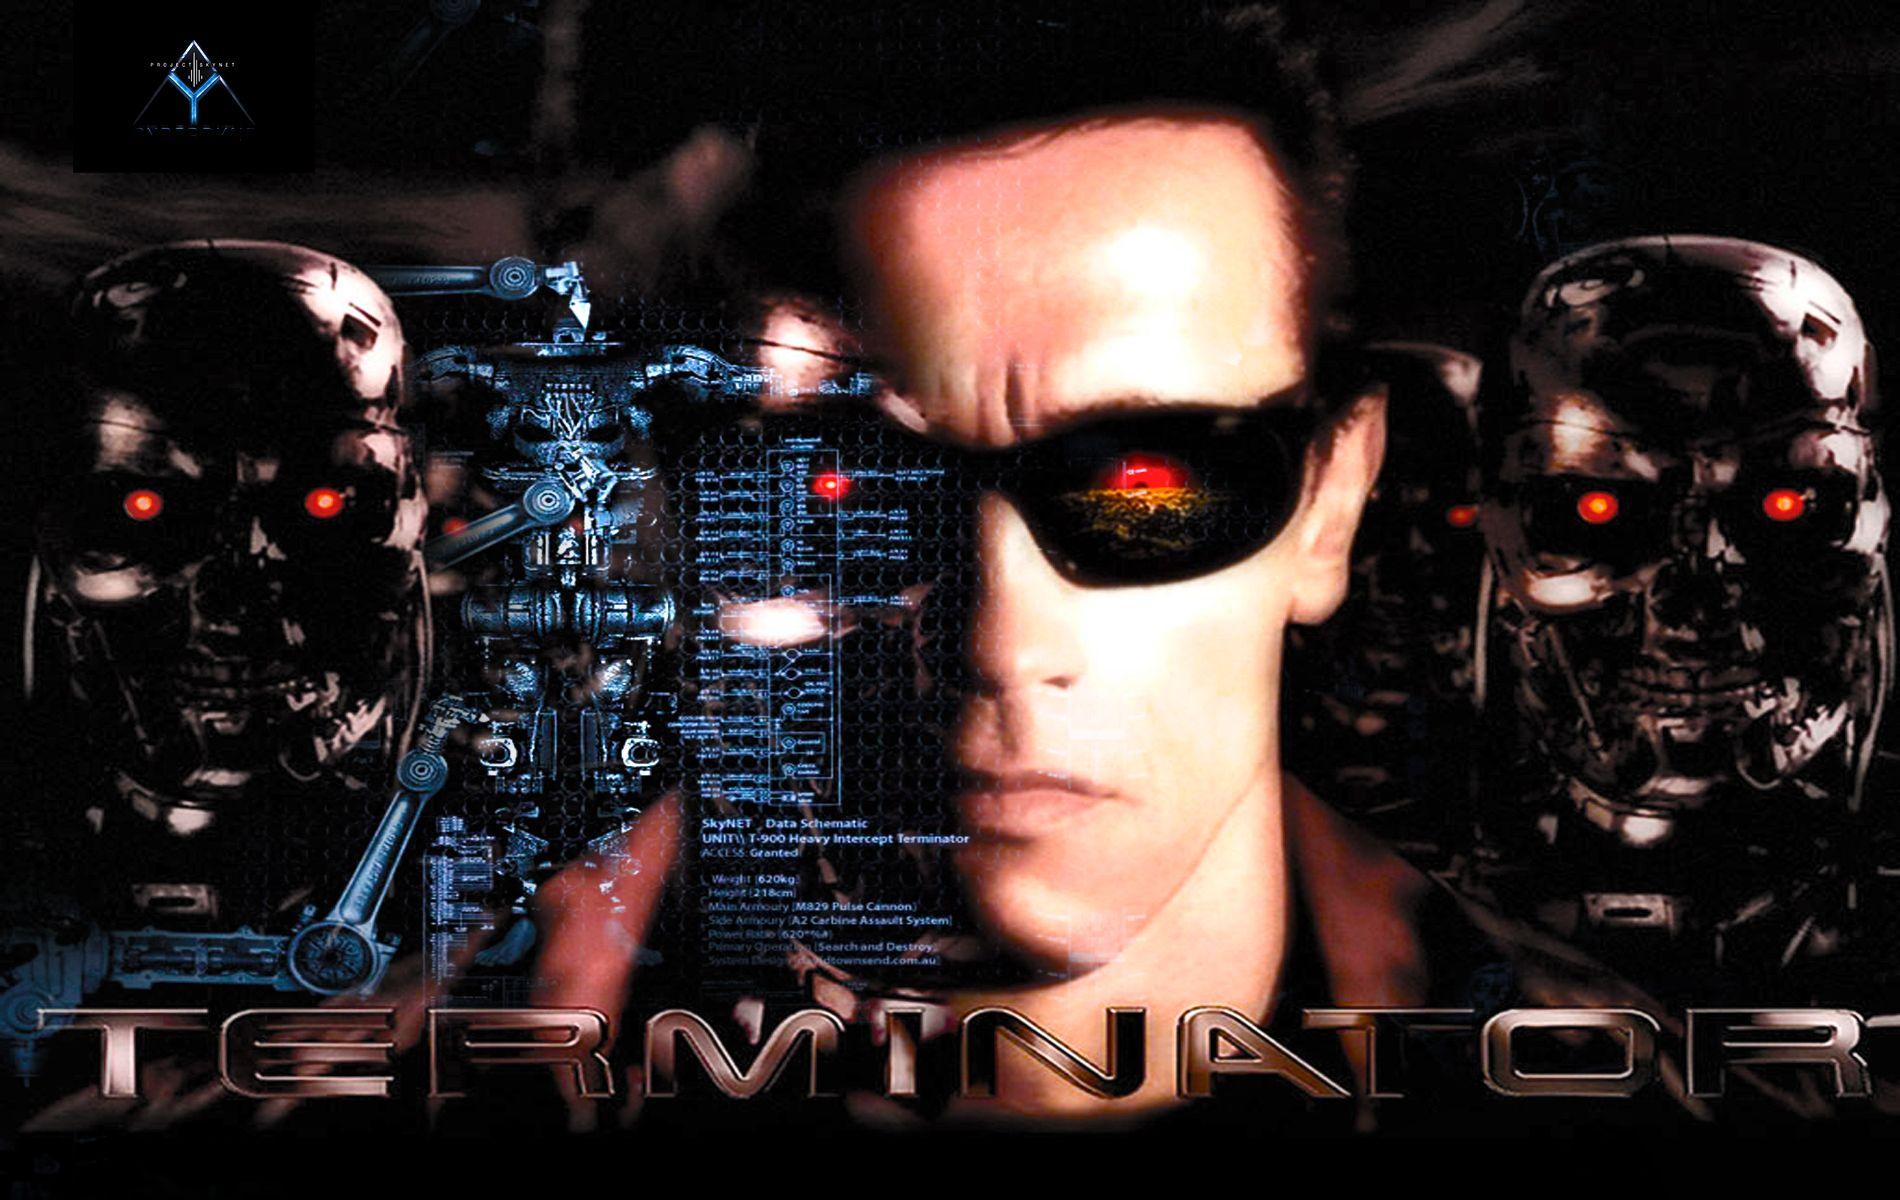 Arnold Terminator by Brandon Parker Wallpaper and Background Imagex1200